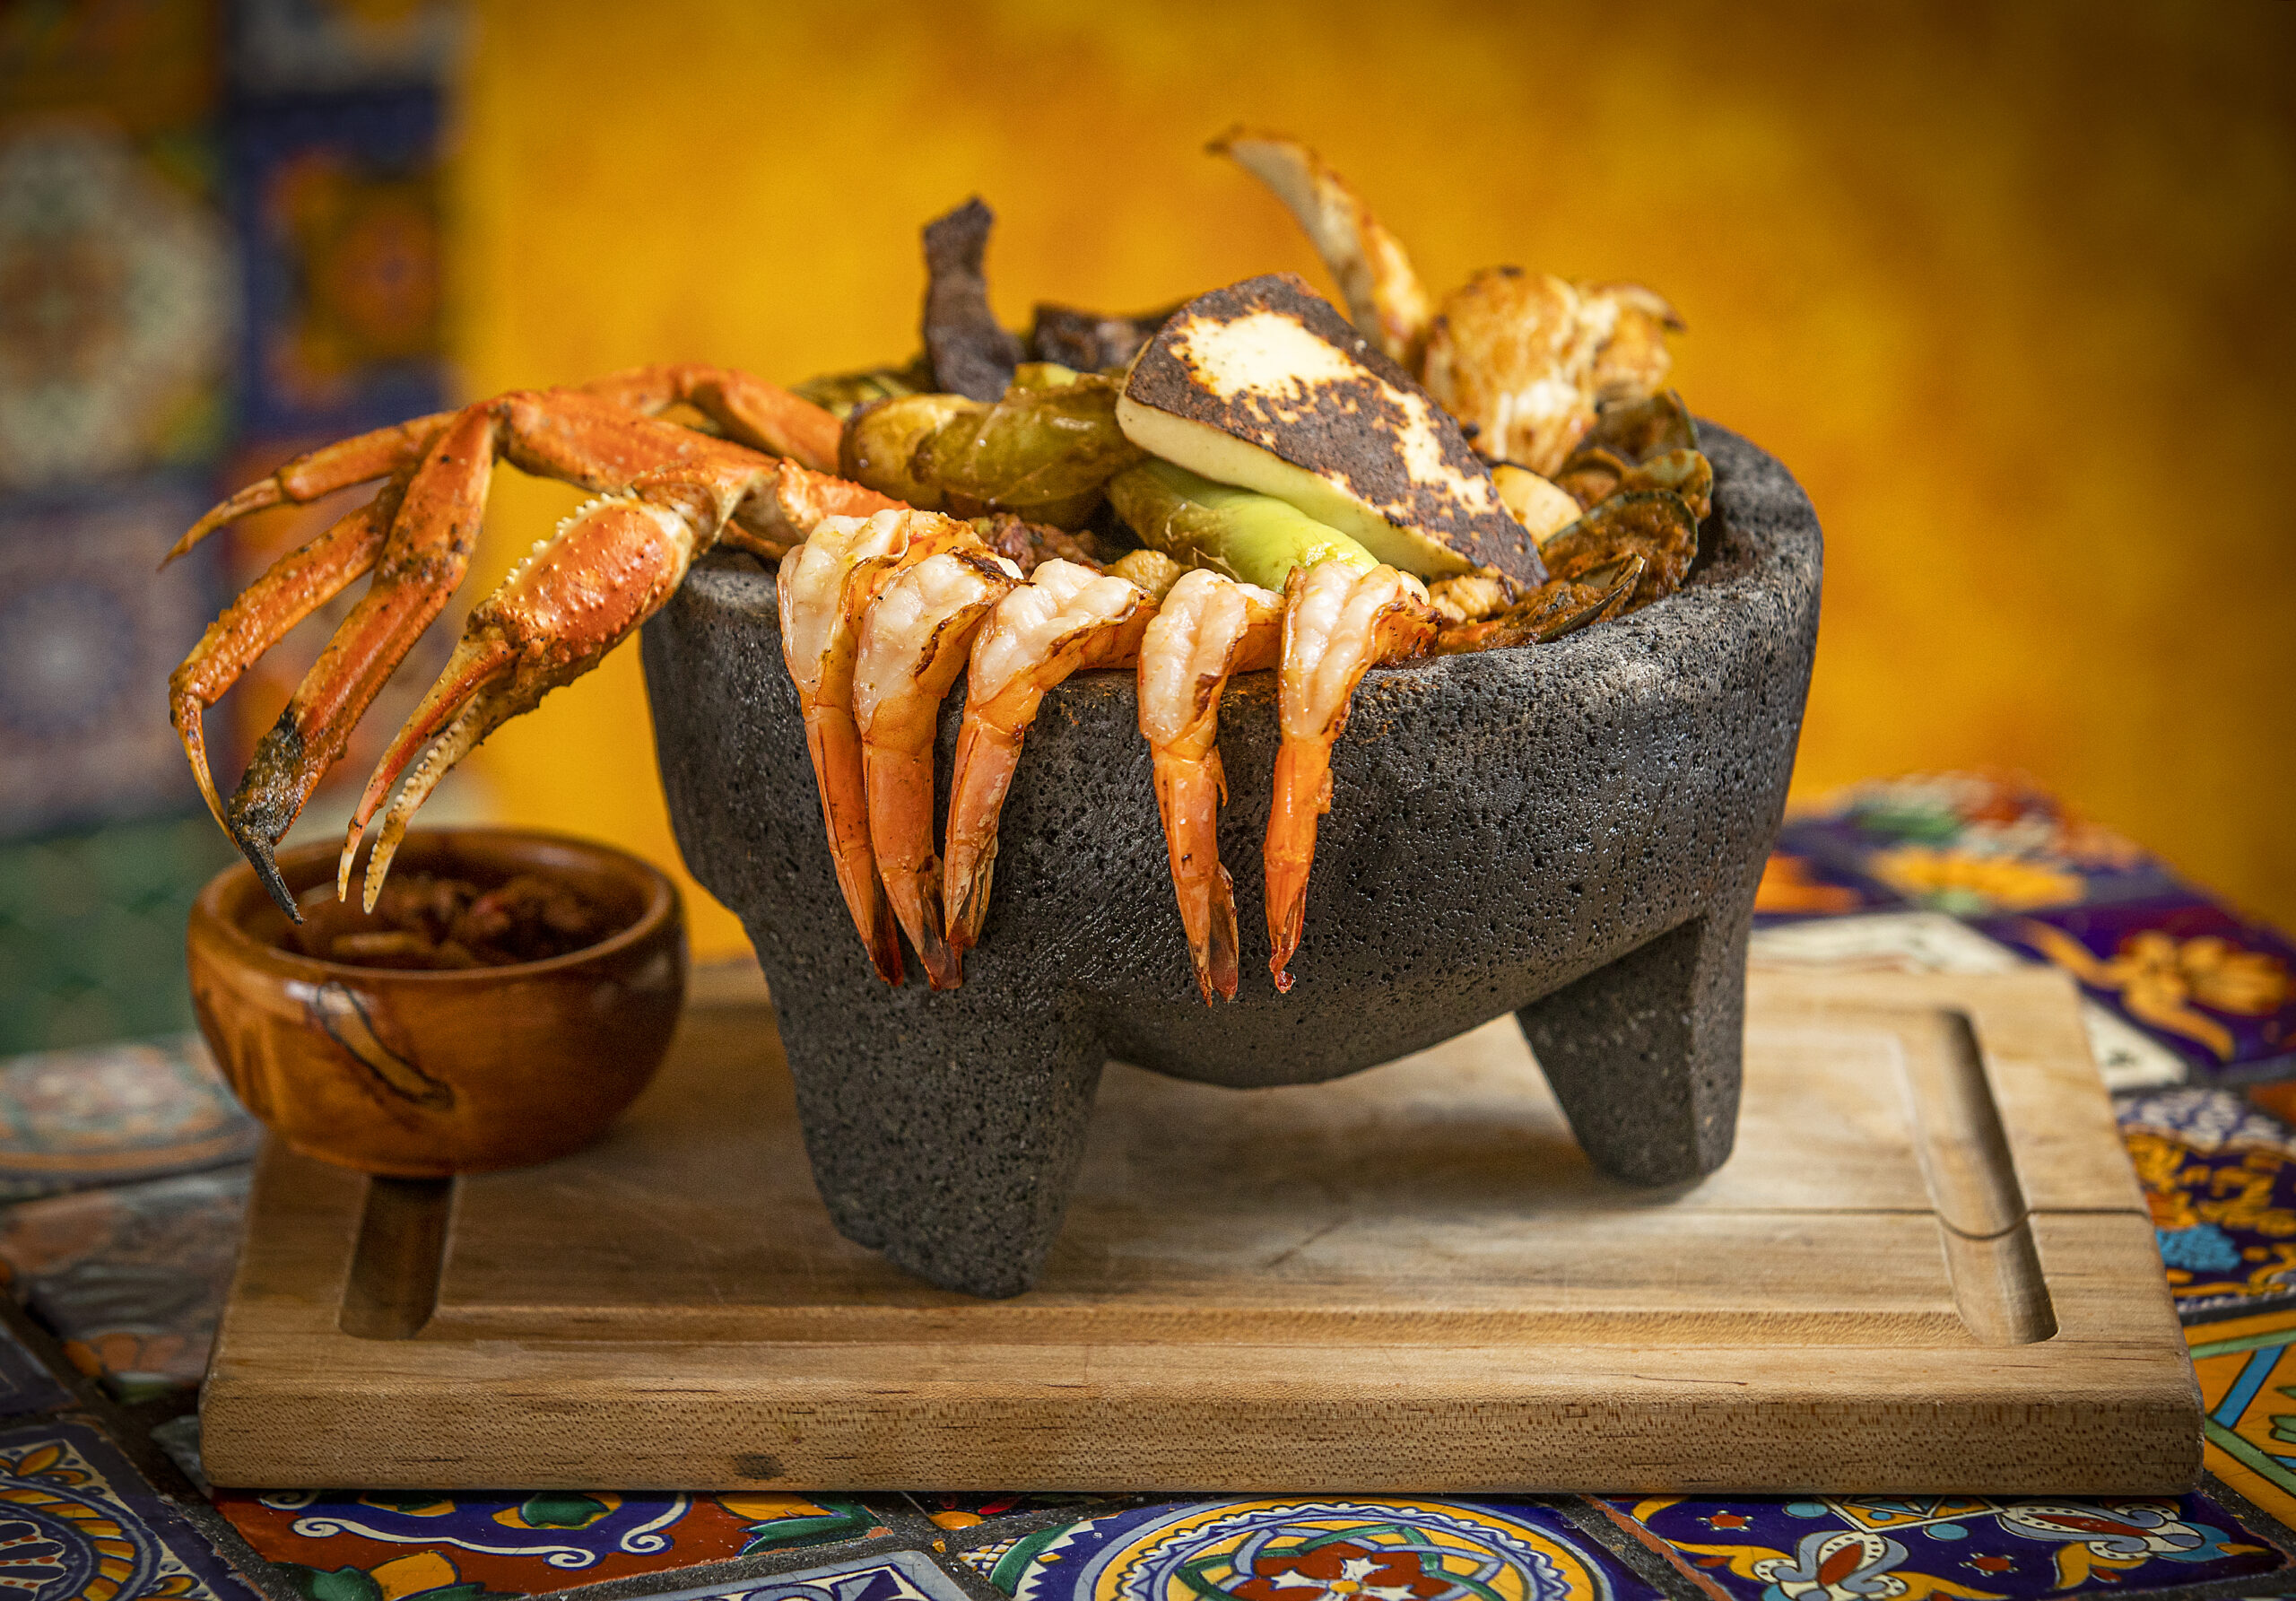 Molcajete Mar y Terra with seafood and beef from Pezcow in Windsor on Friday, April 1, 2022. (John Burgess/The Press Democrat)